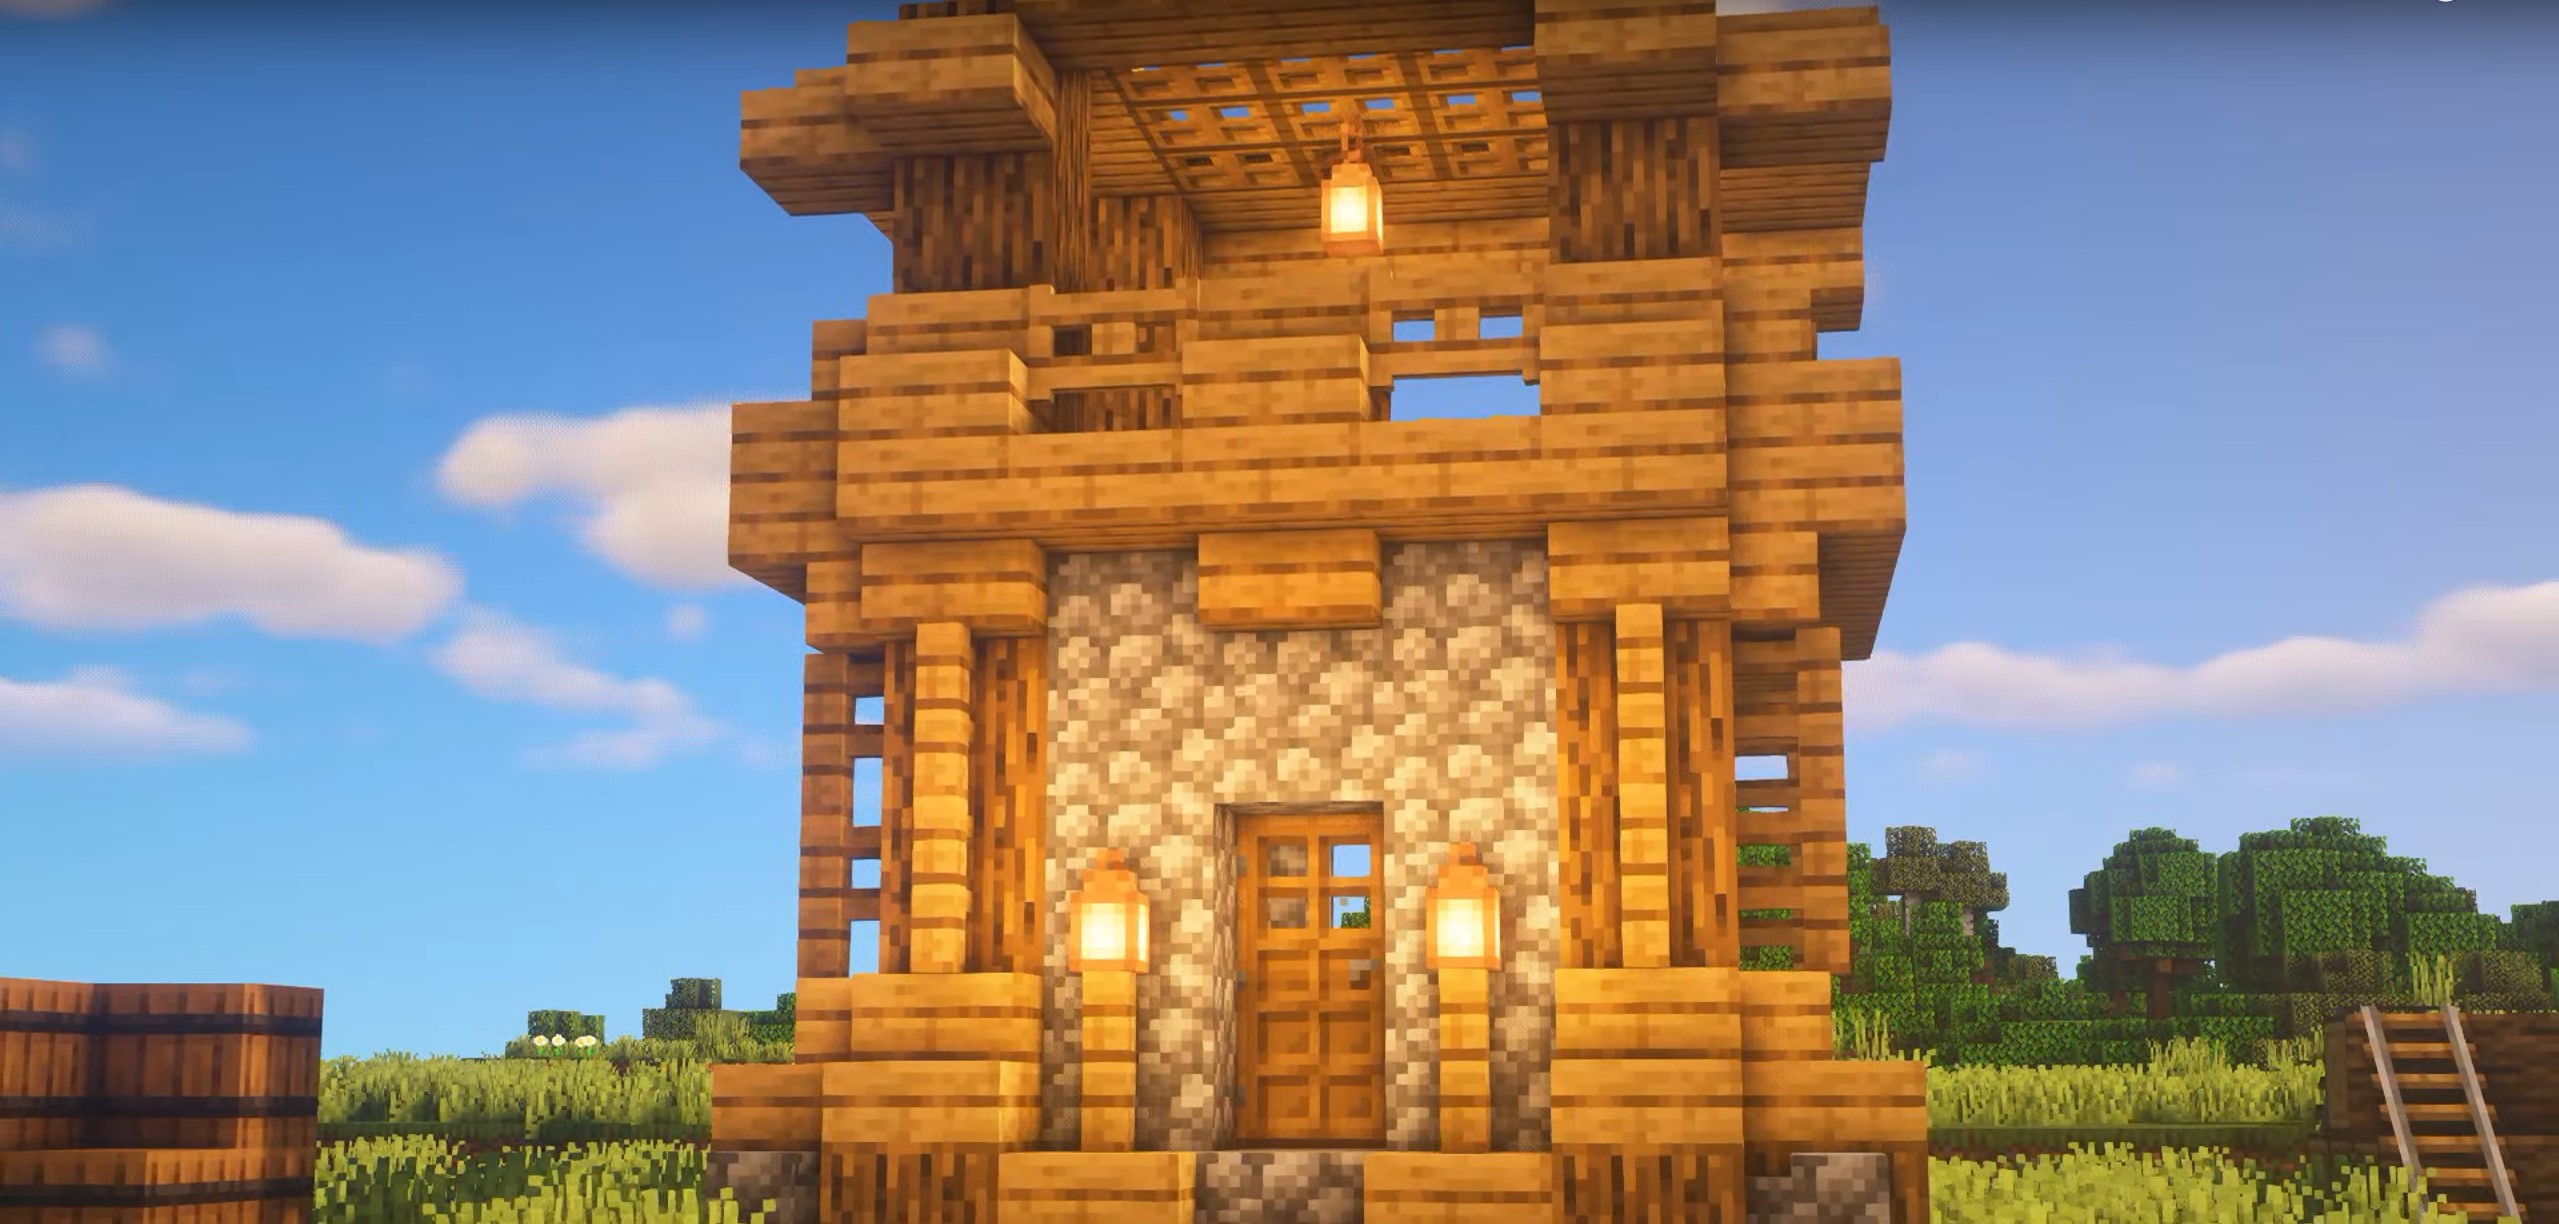 Small Tower House minecraft building idea